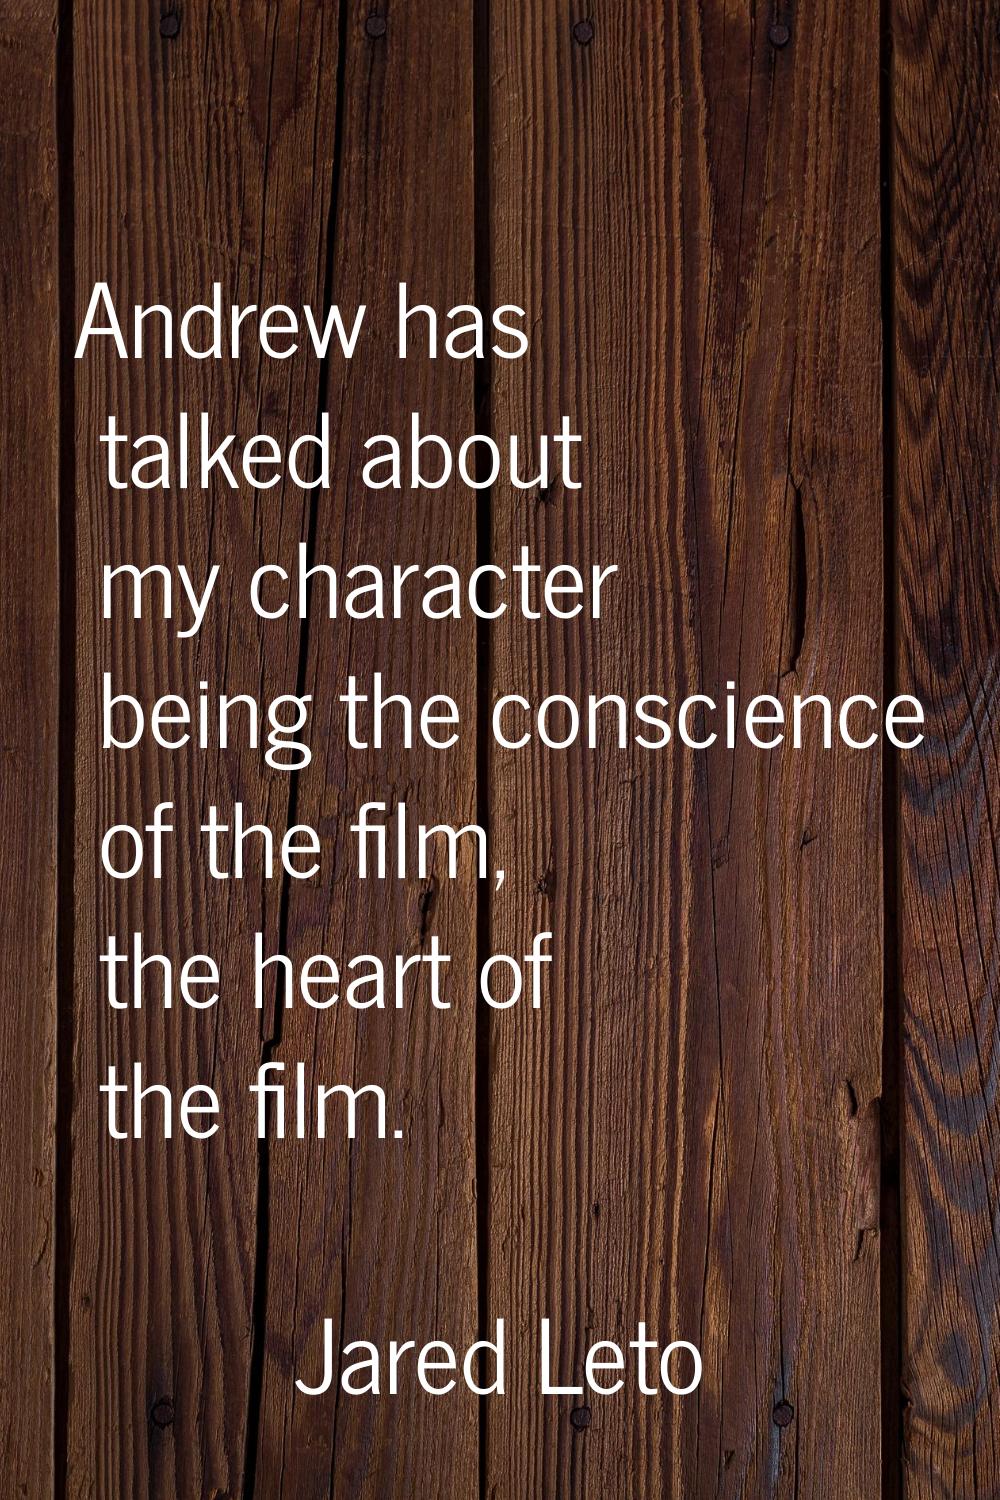 Andrew has talked about my character being the conscience of the film, the heart of the film.